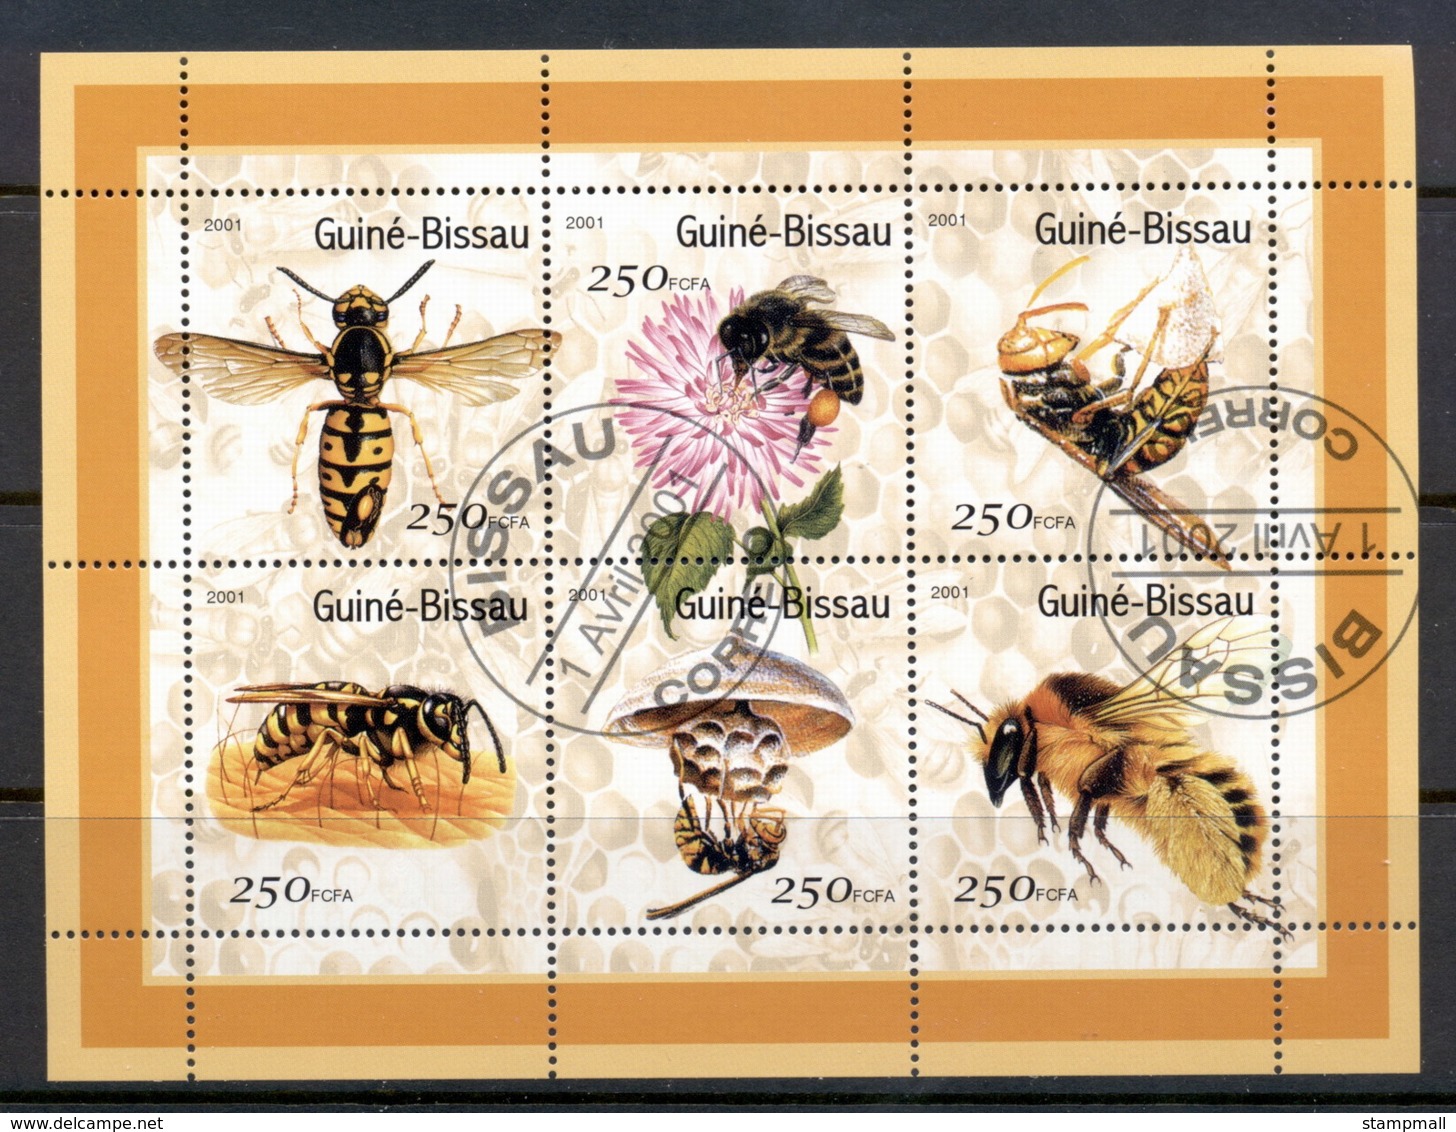 Guinea Bissau 2001 Insects, Bees MS CTO - Guinea-Bissau